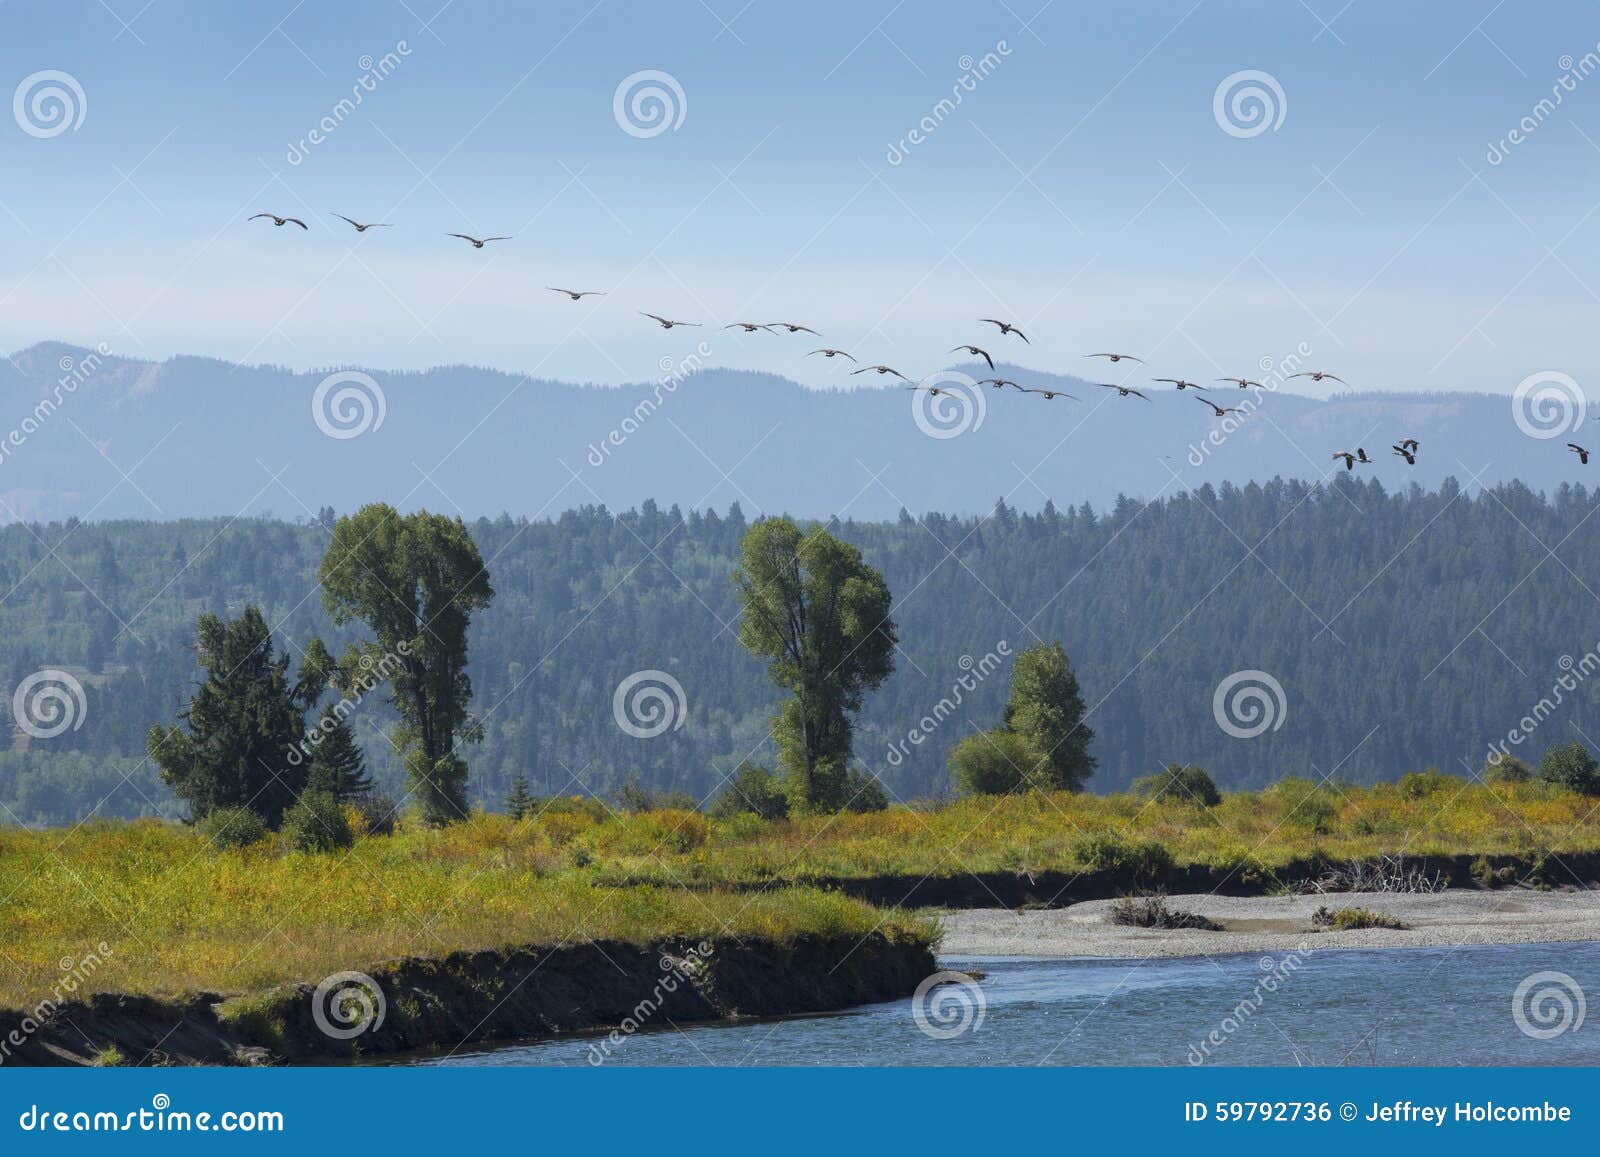 flock of geese flying over buffalo fork river, moran, wyoming.